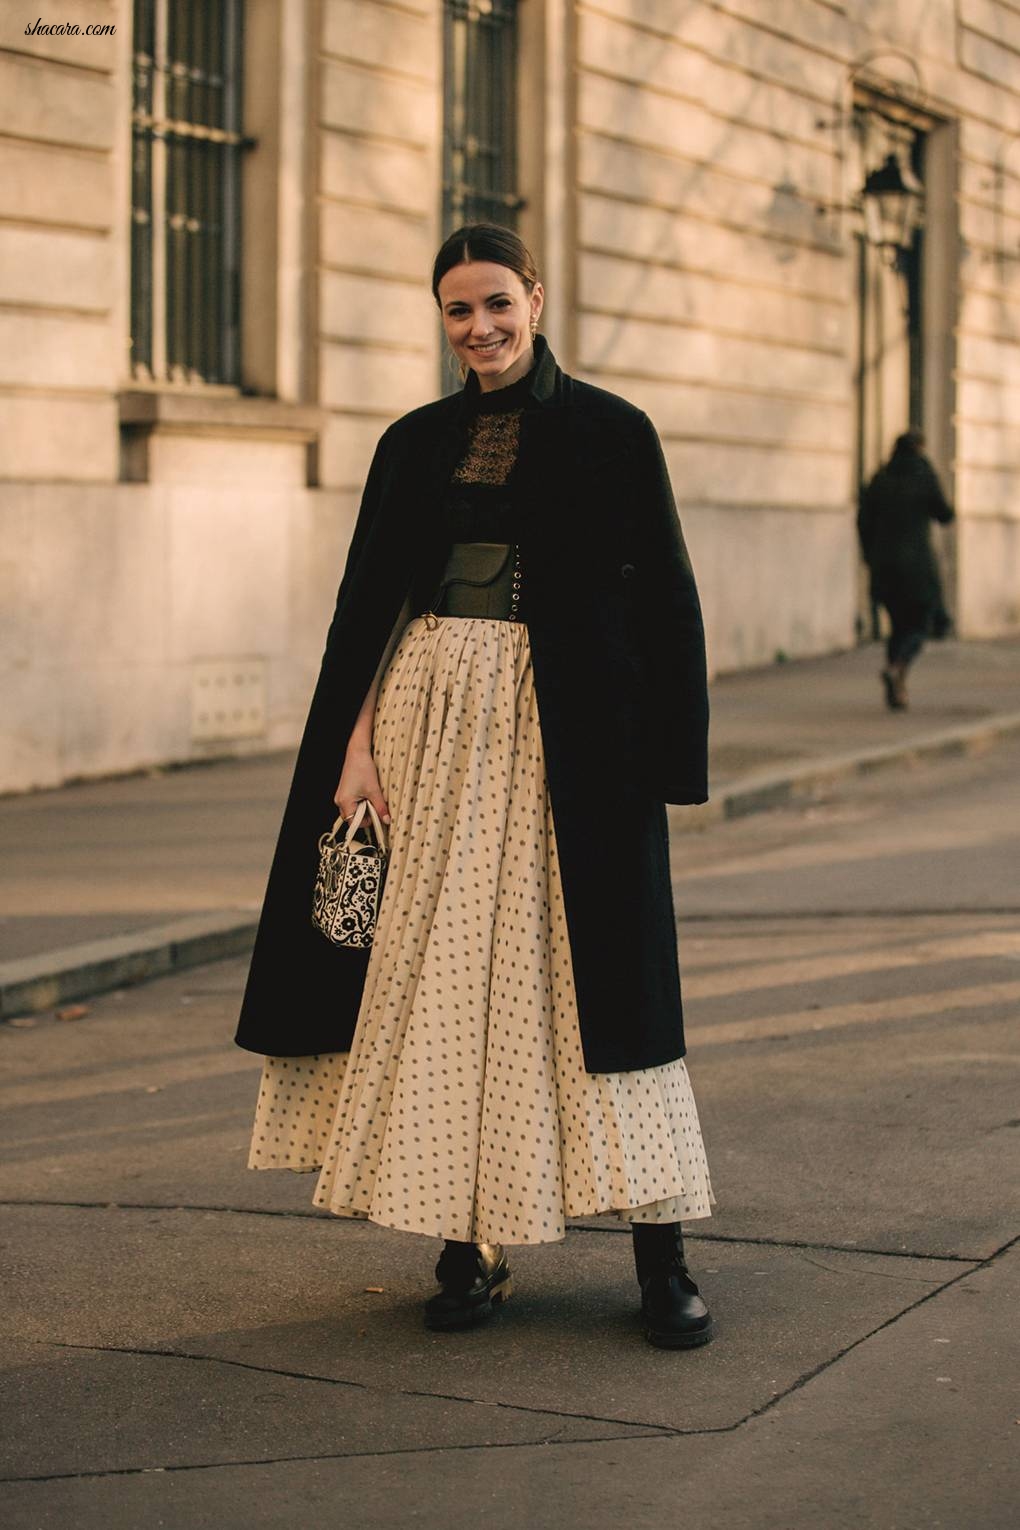 THE BEST STREET STYLE FROM COUTURE FASHION WEEK PART 2